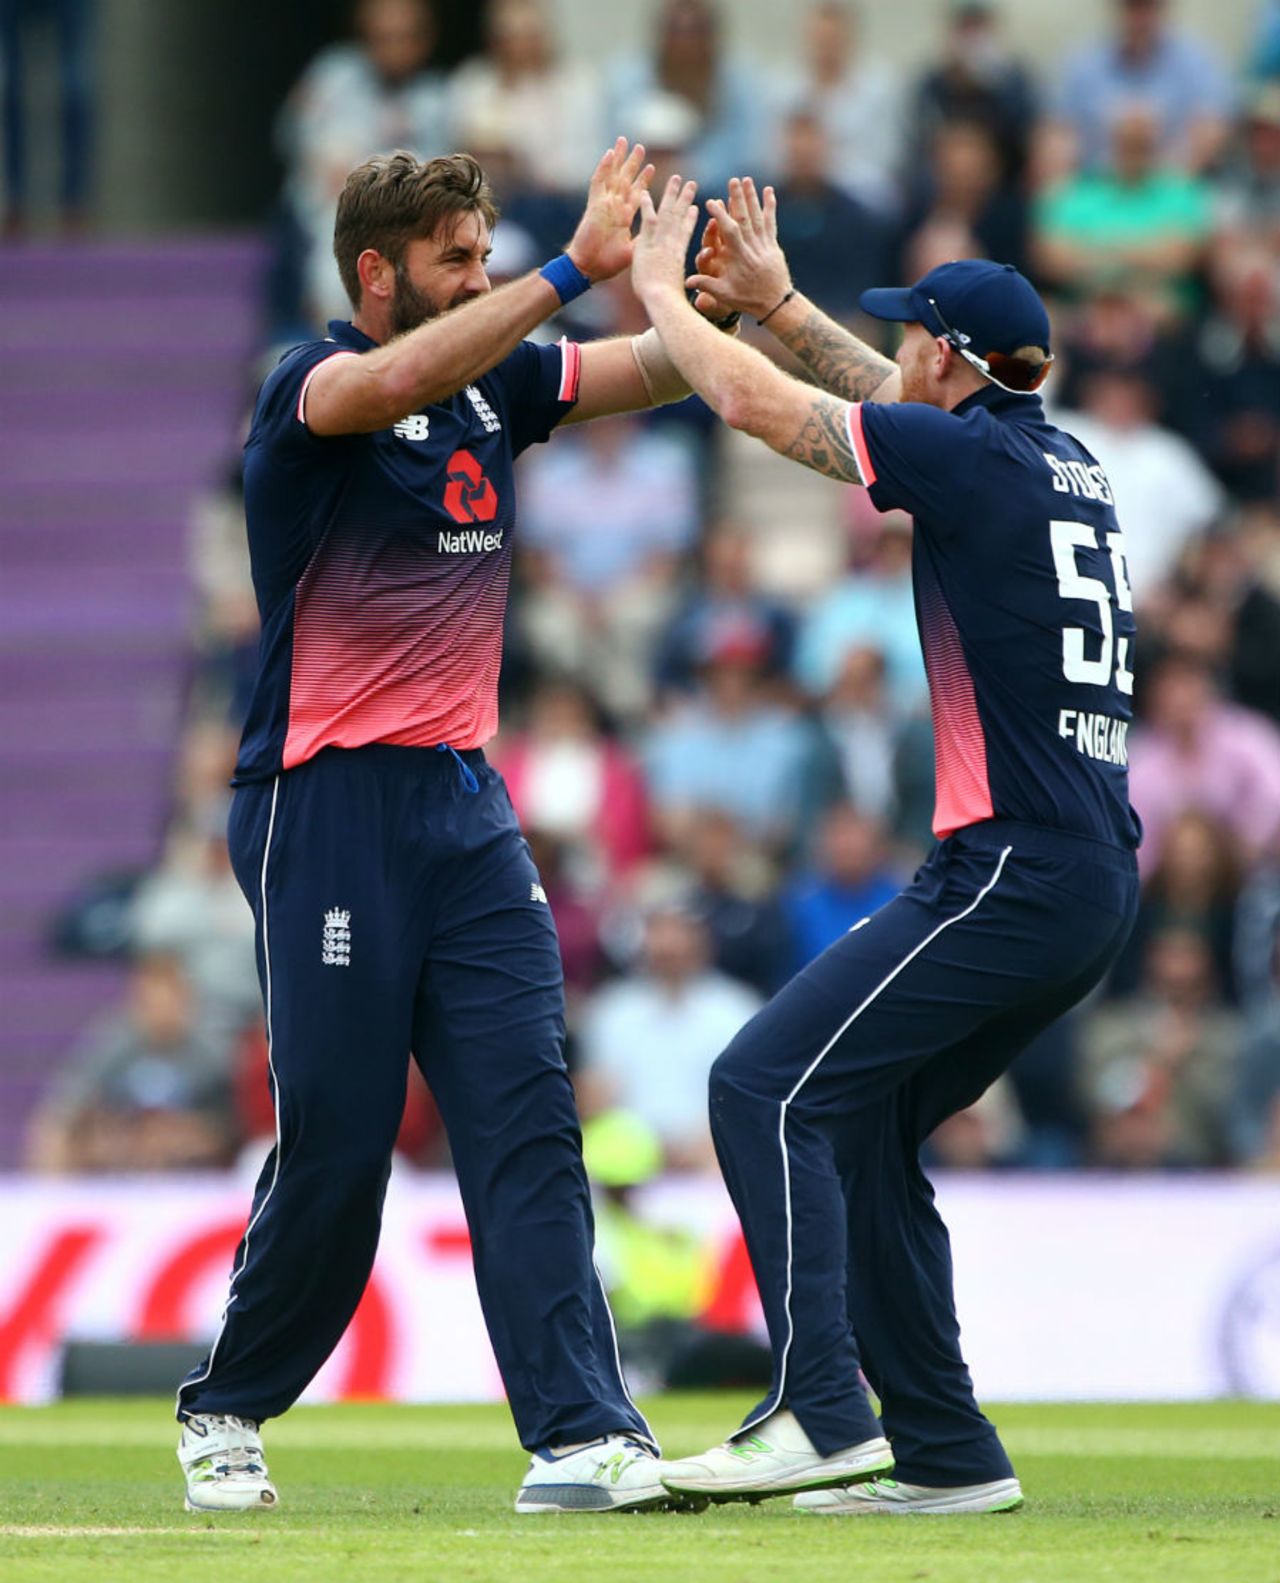 Liam Plunkett claimed the vital wicket of AB de Villiers, England v South Africa, 2nd ODI, Ageas Bowl, May 27, 2017